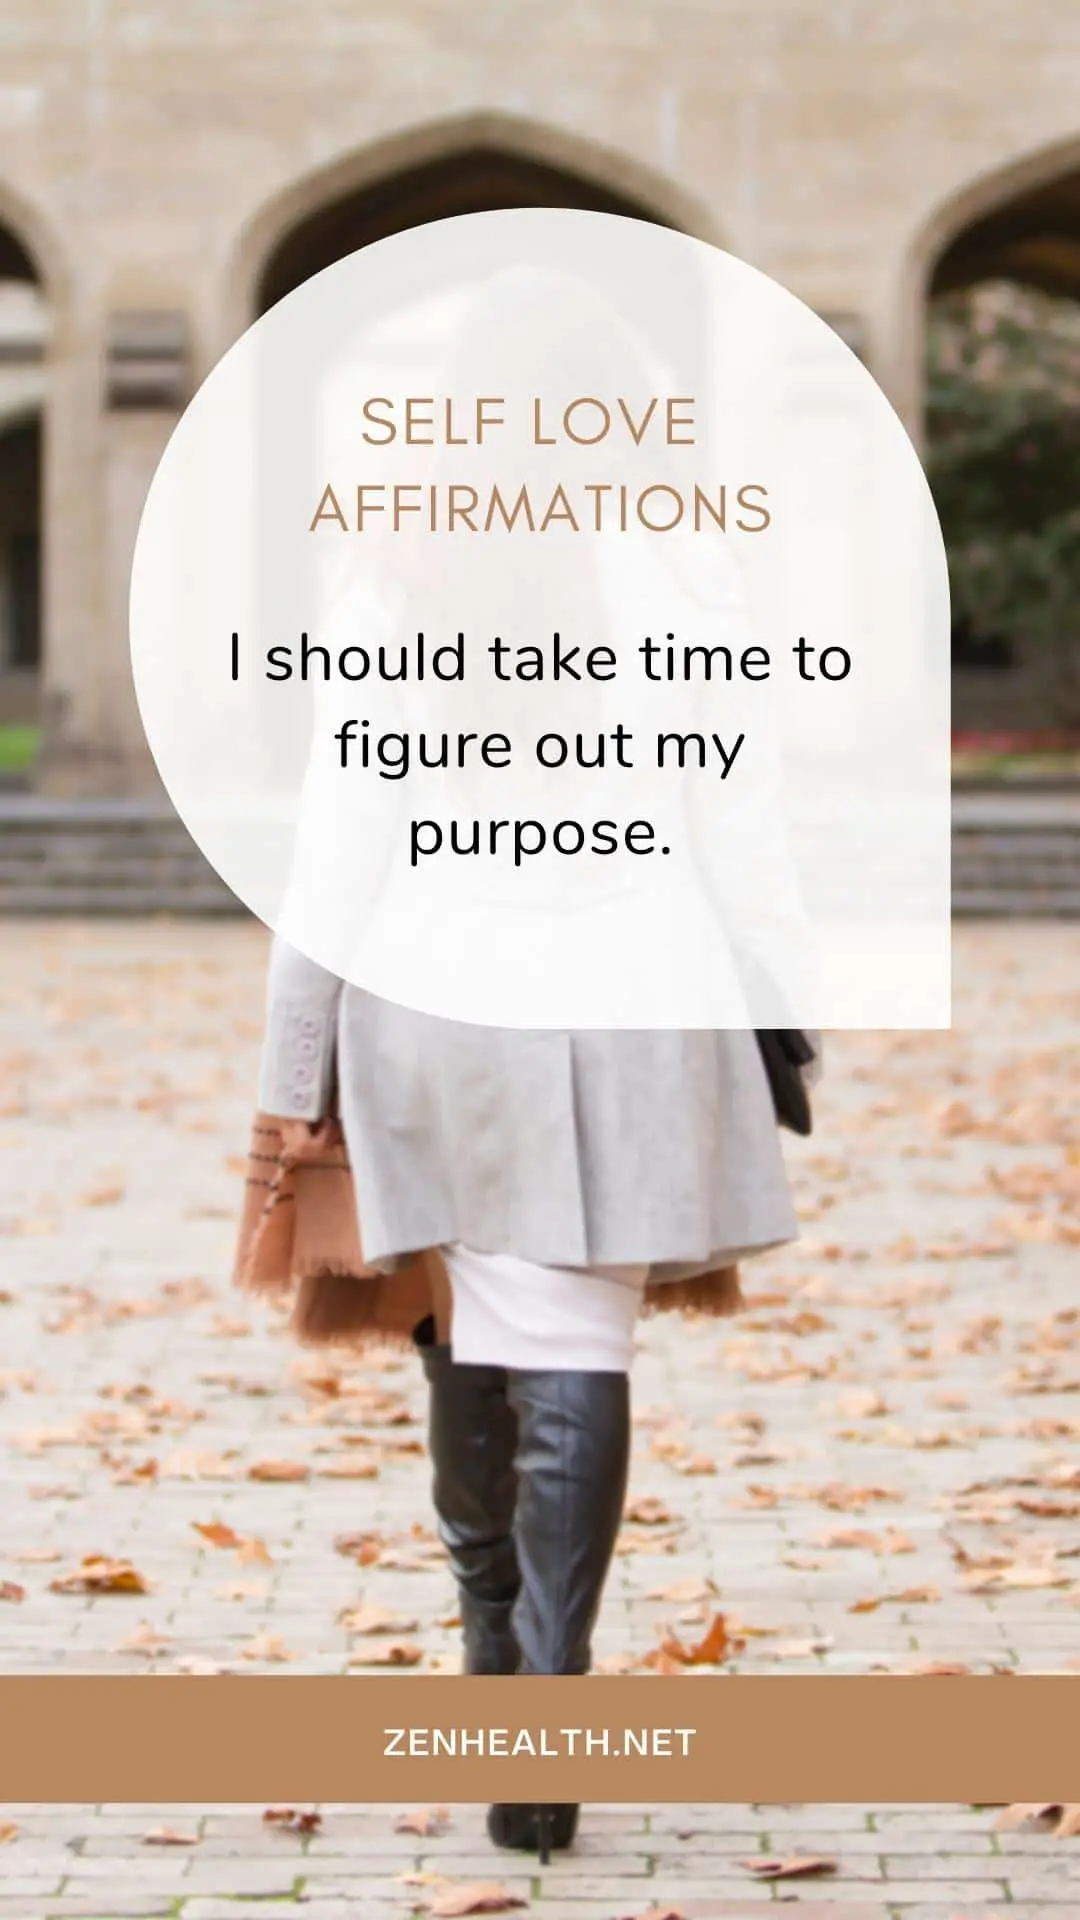 self love affirmations: I should take time to figure out my purpose